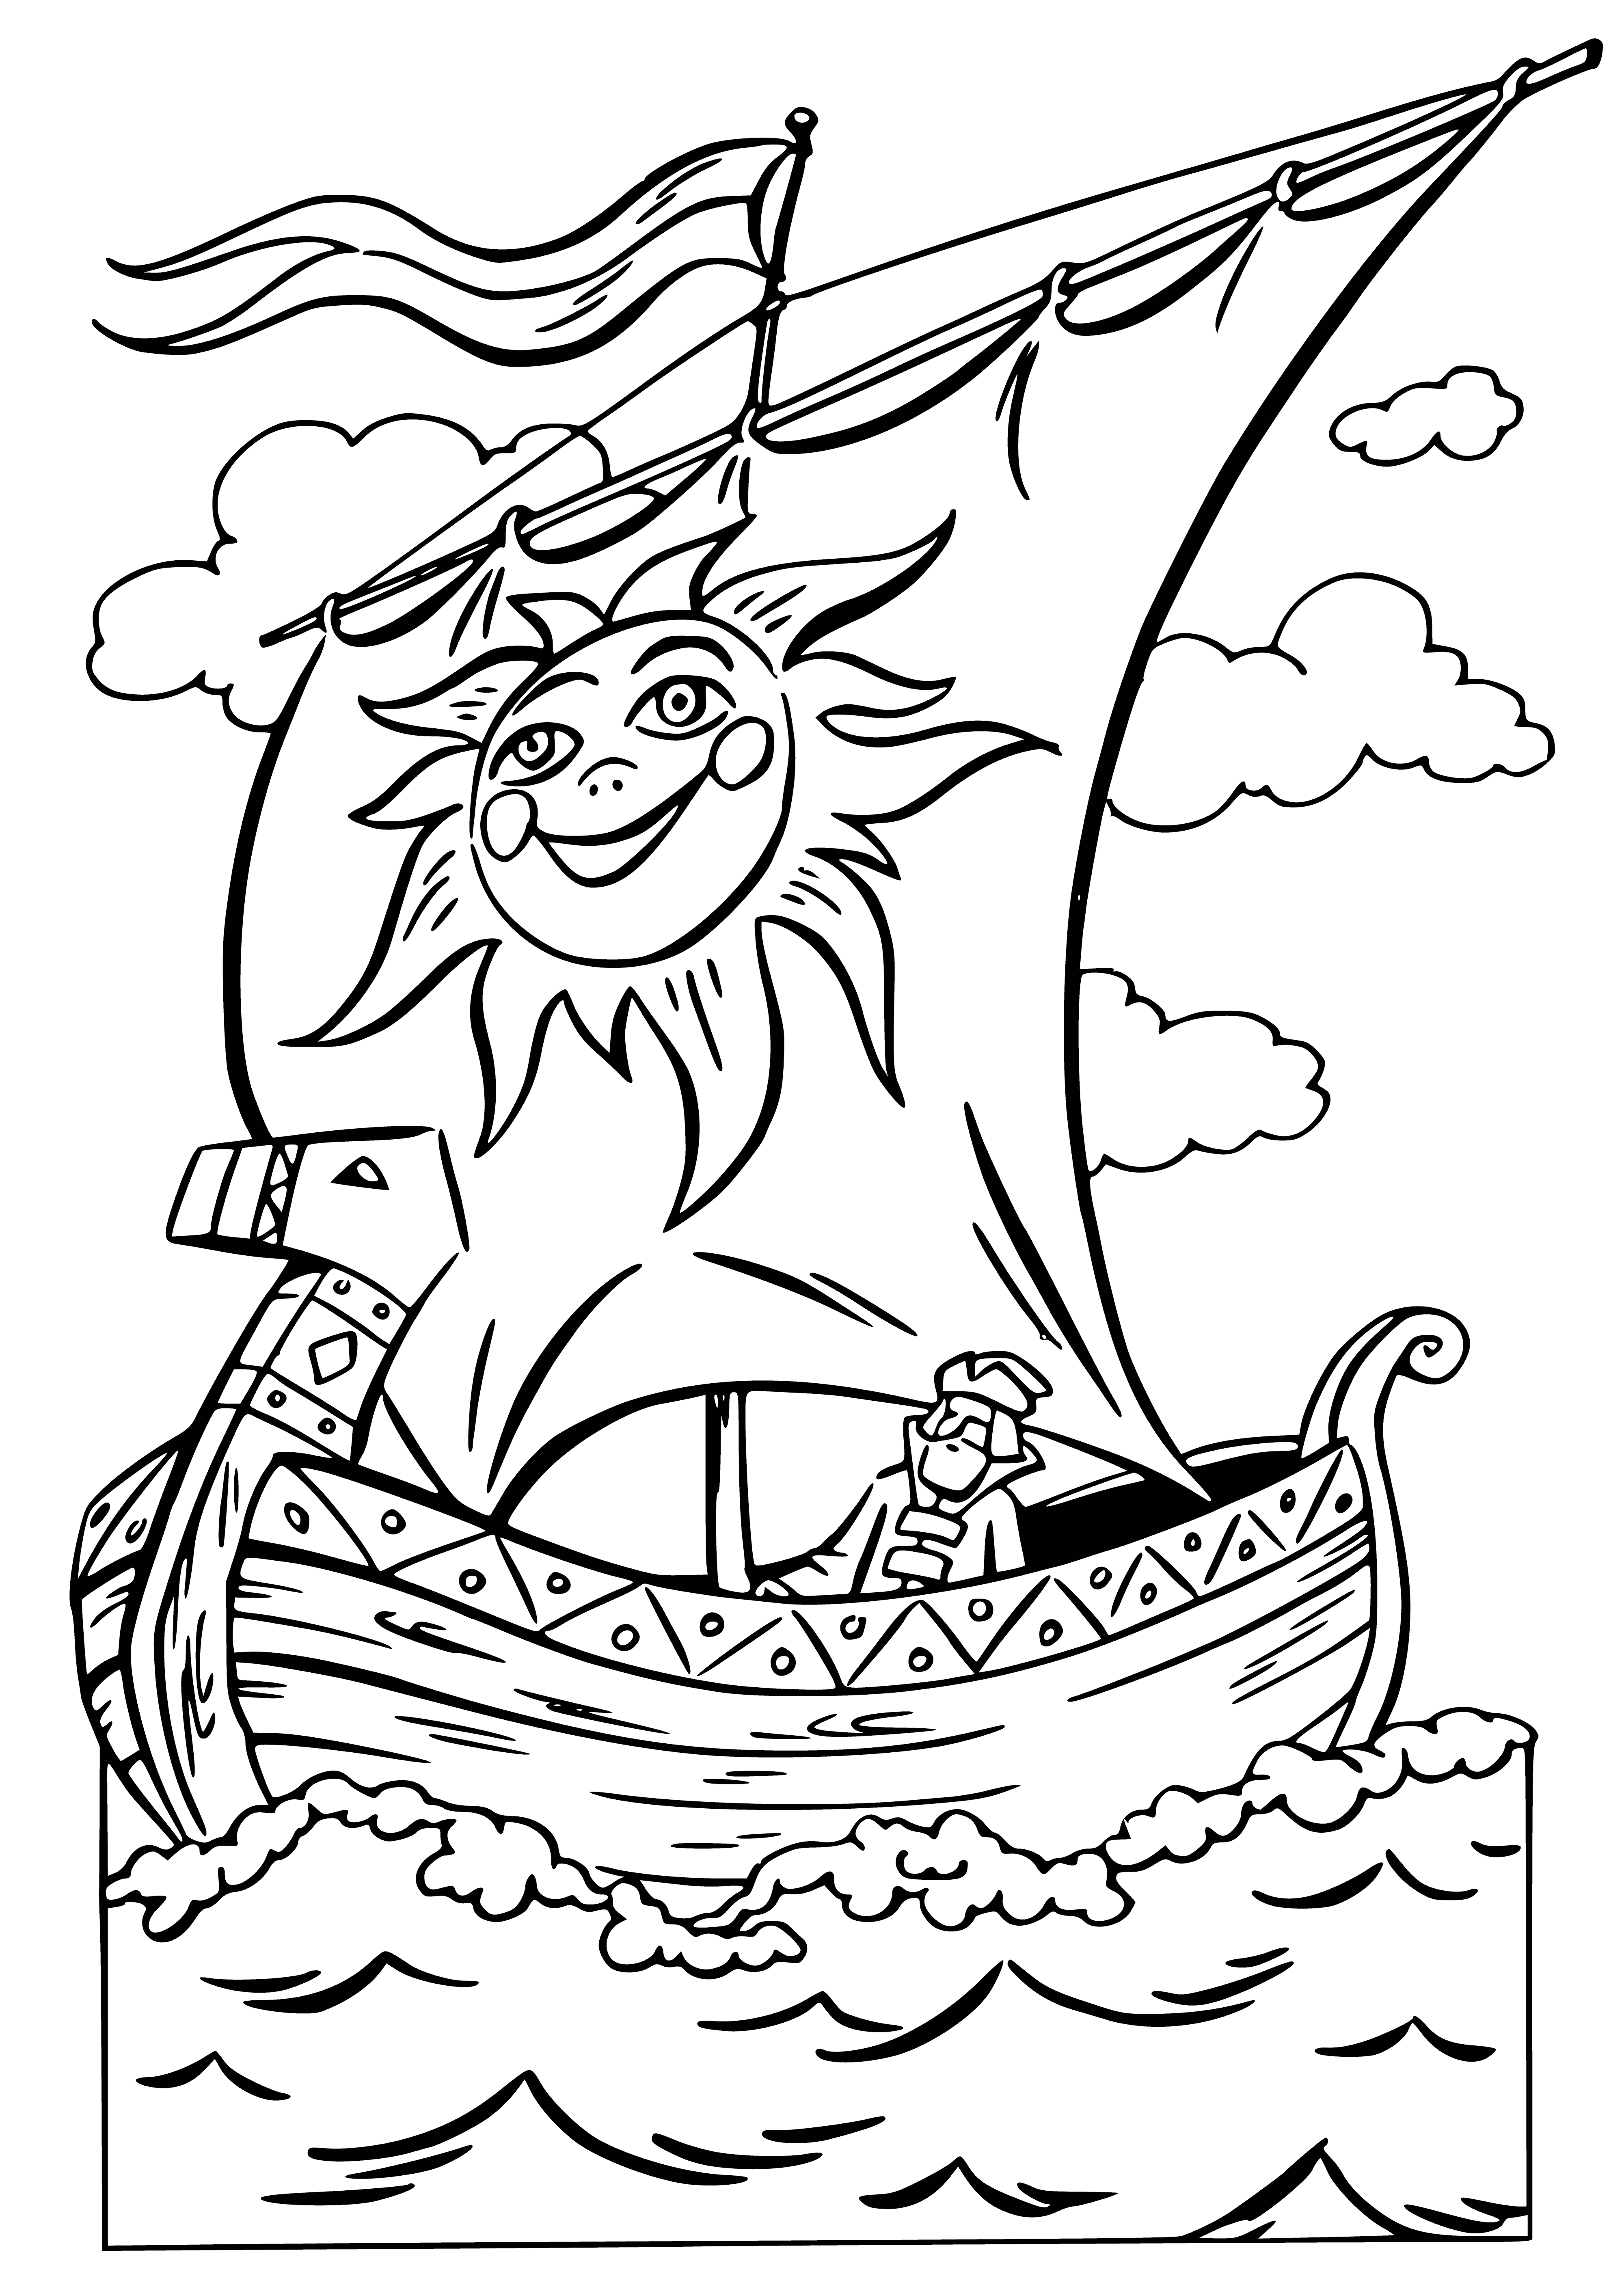 coloring page: Man plays instrument in blue outfit, long beard. People clap, enjoying music.